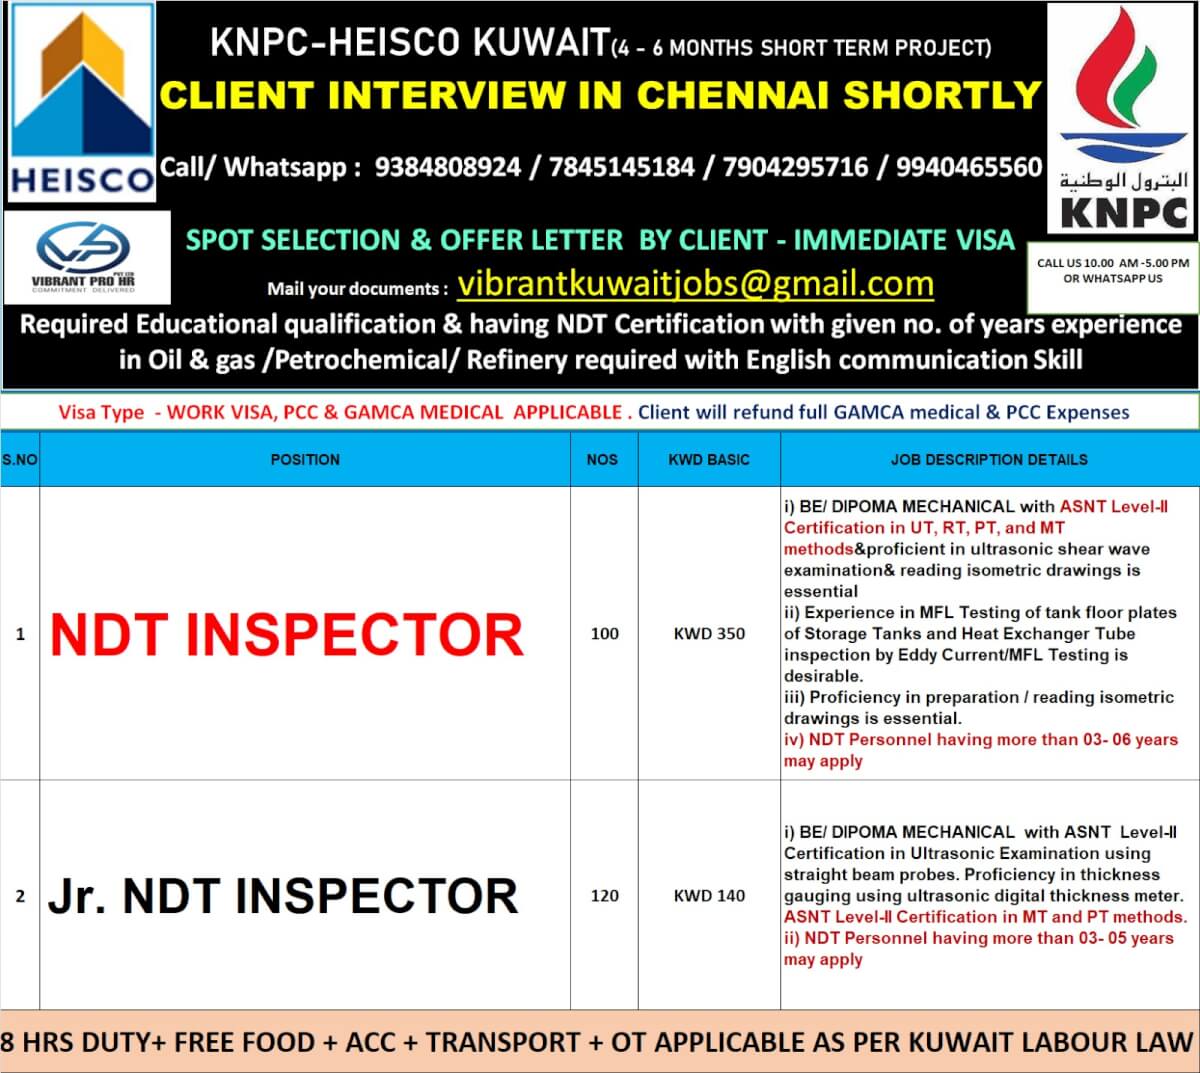 KNPC-HEISCO KUWAIT(4 - 6 MONTHS SHORT TERM PROJECT) CLIENT INTERVIEW IN CHENNAI SHORTLY